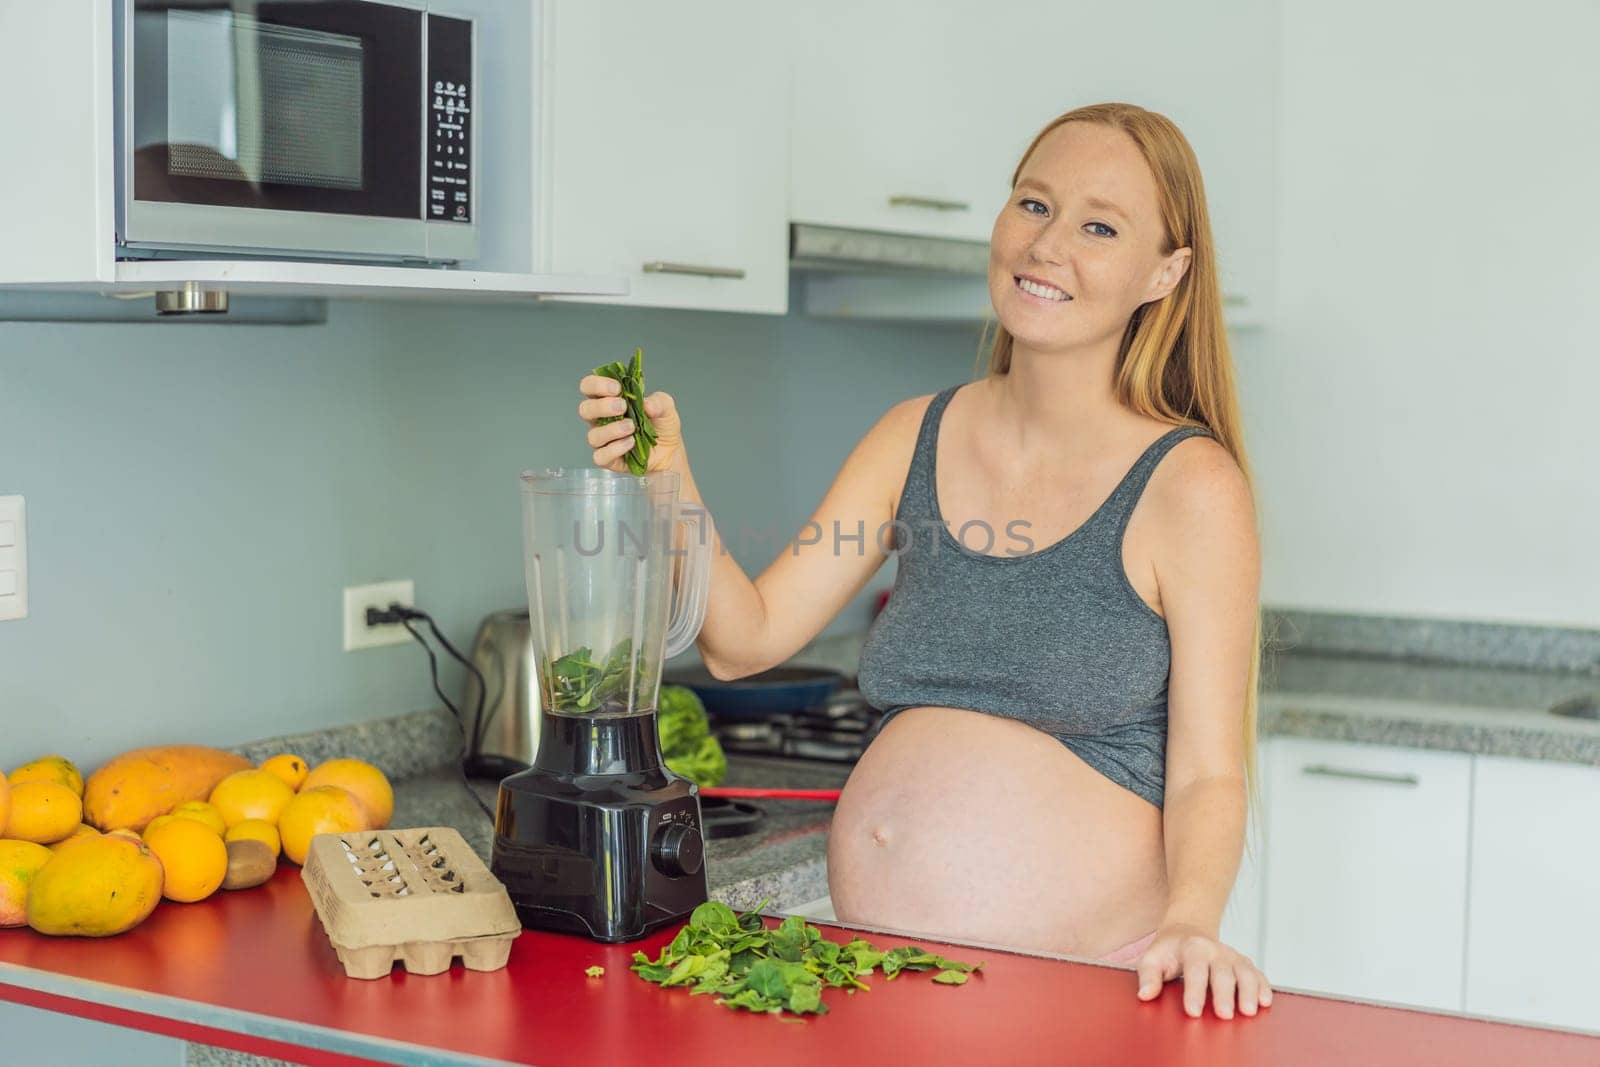 Embracing a nutritious choice, a pregnant woman joyfully prepares a vibrant vegetable smoothie, prioritizing wholesome ingredients for optimal well-being during her maternity journey by galitskaya